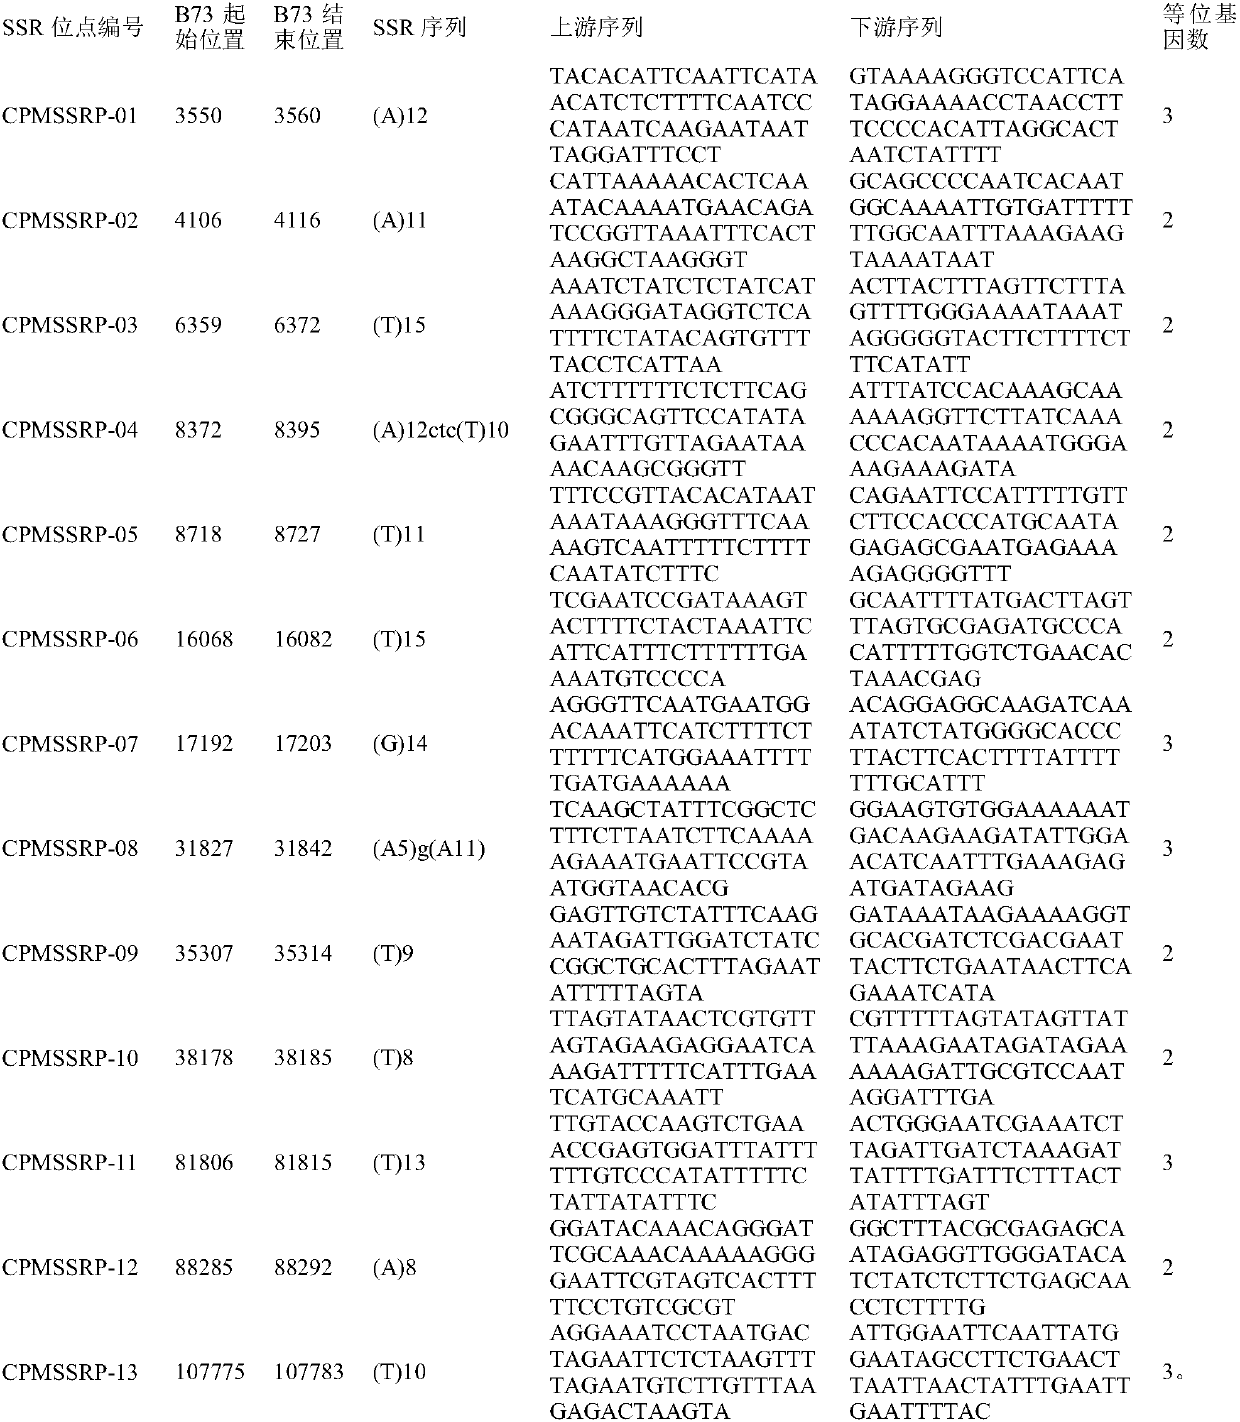 Corn chloroplast genome SSR site and application in variety identification